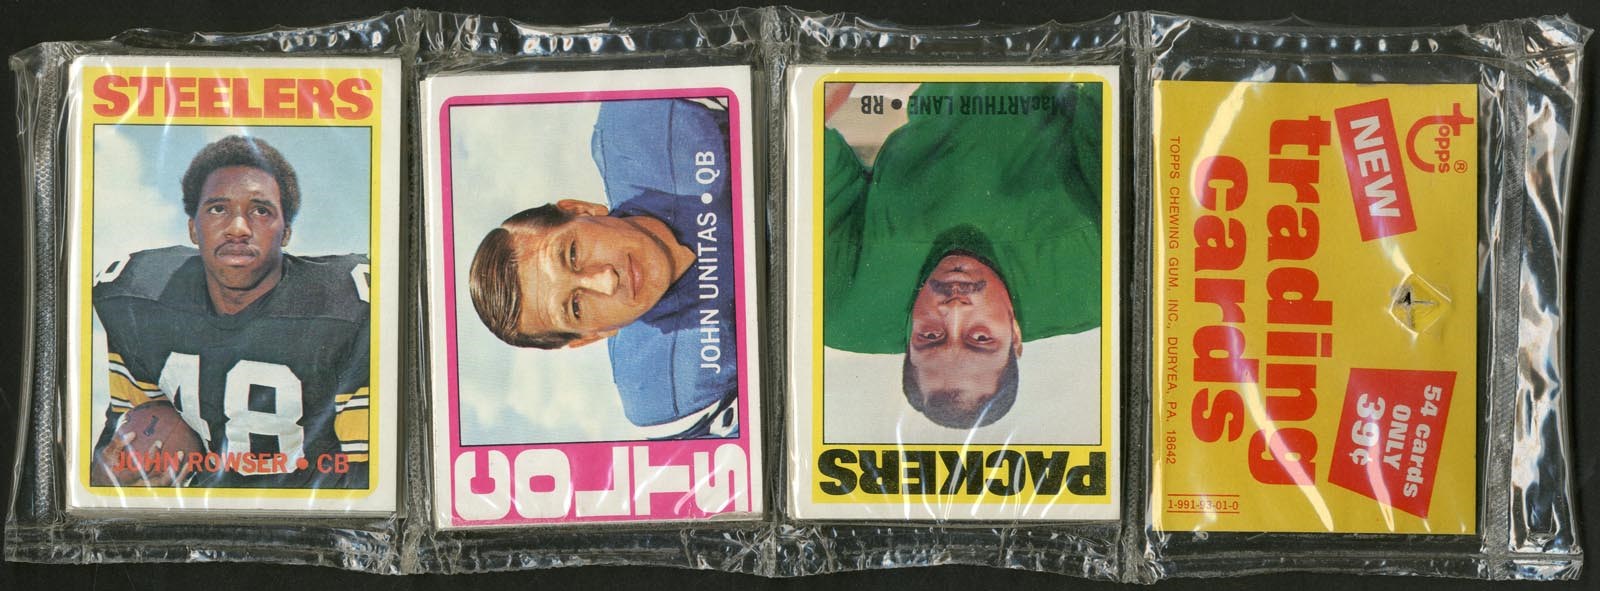 Baseball and Trading Cards - 1972 Topps Football Series 2 Unopened Rack Pack with Unitas on Top